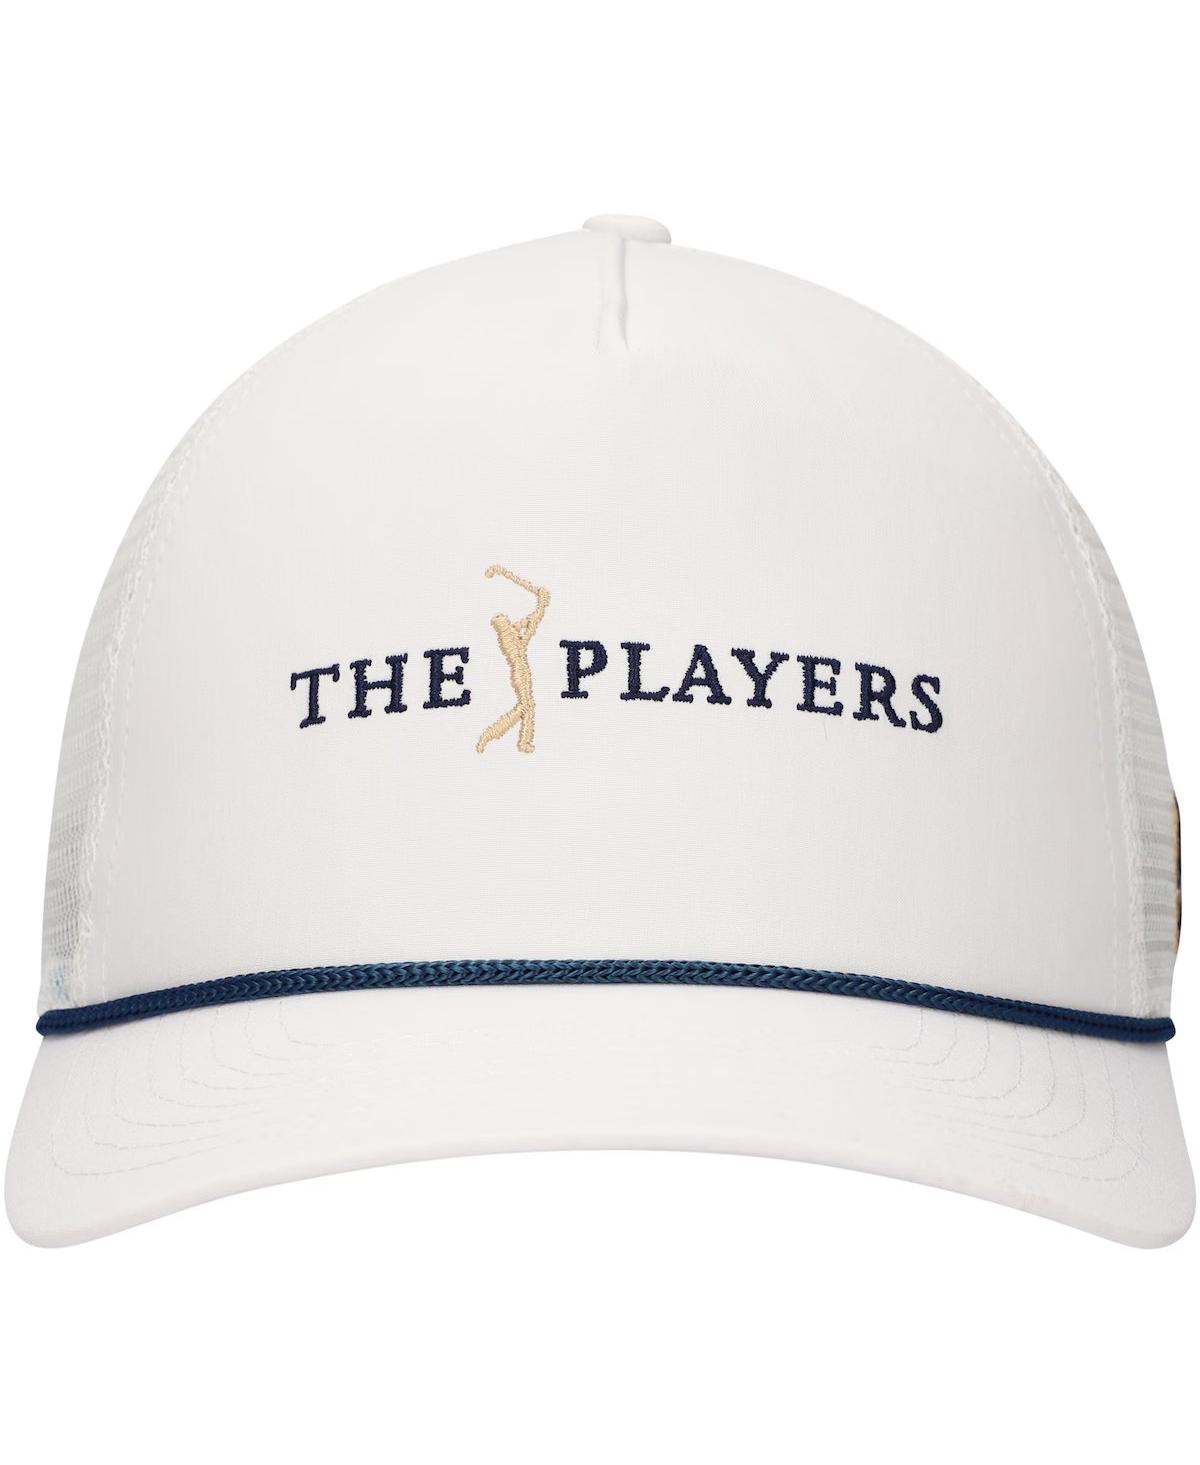 Shop Breezy Golf Men's White The Players Rope Adjustable Hat